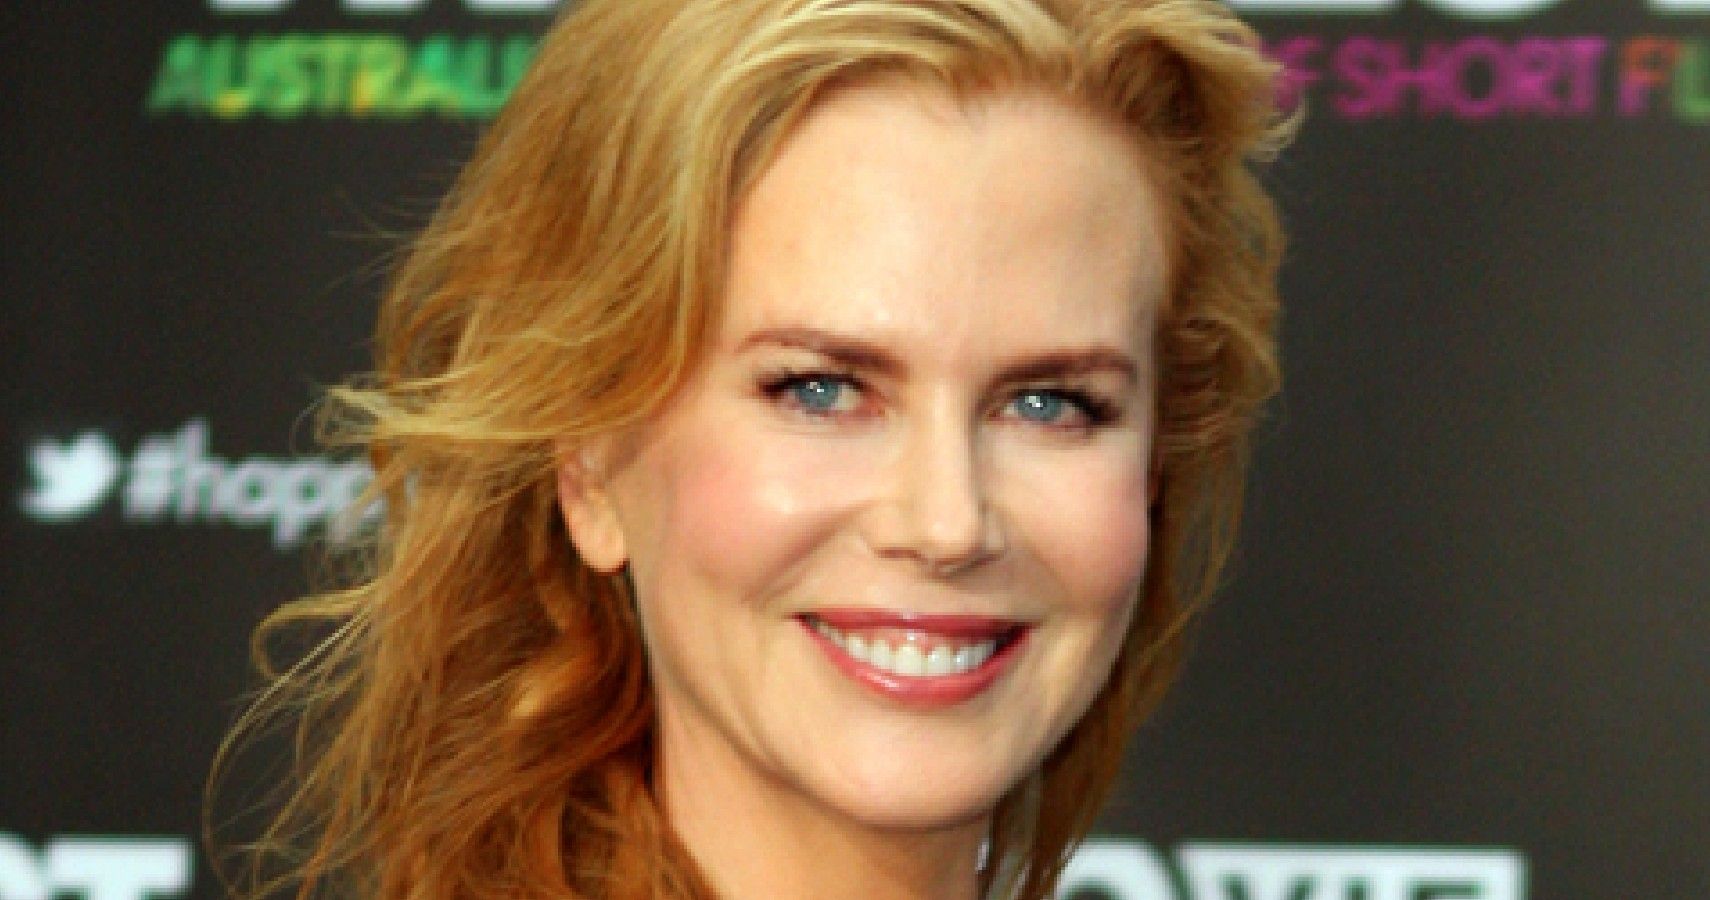 Nicole Kidman Regrets Not Having More Kids: I Didn't Have 'A Choice'